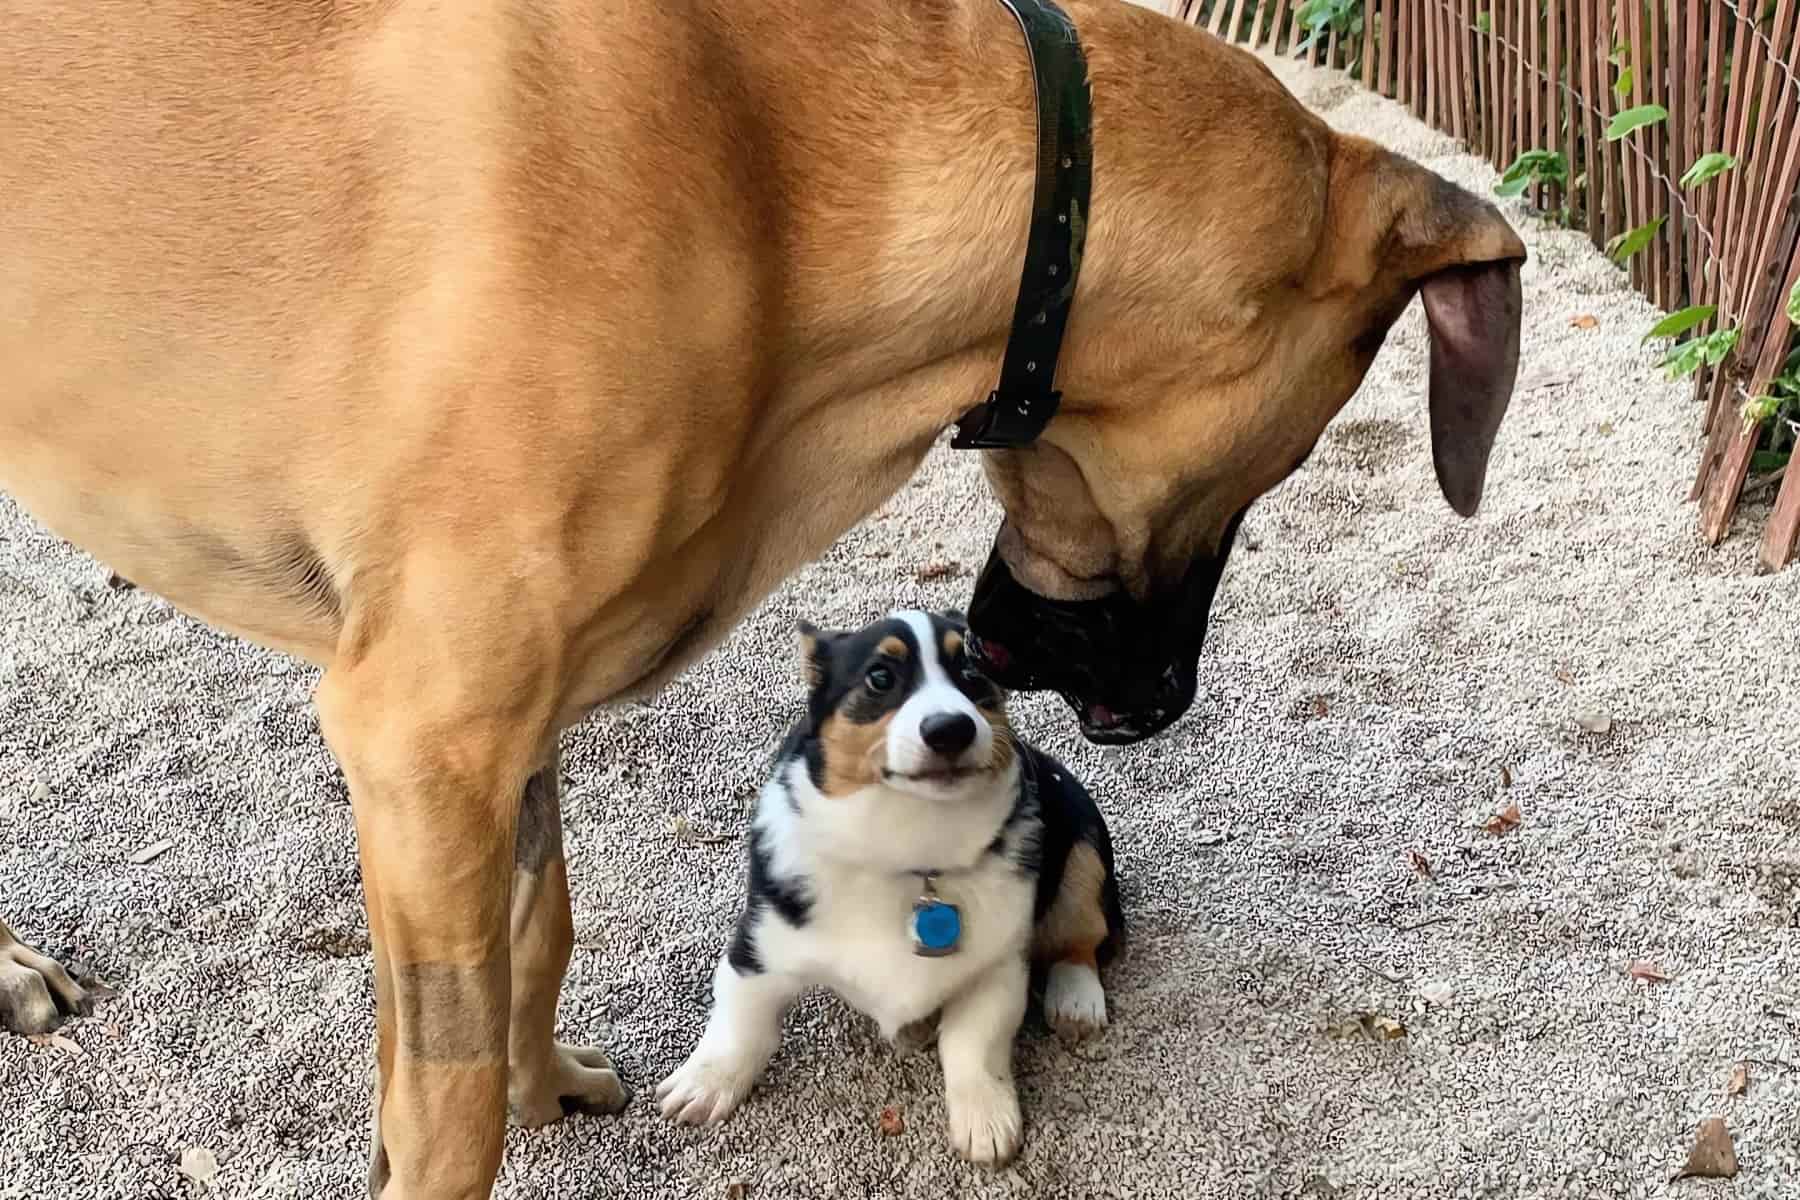 Corgis and Great Danes are wonderful in their own right and can make great pets for the right families. Here you see the Great Dane playing with the smaller corgi.